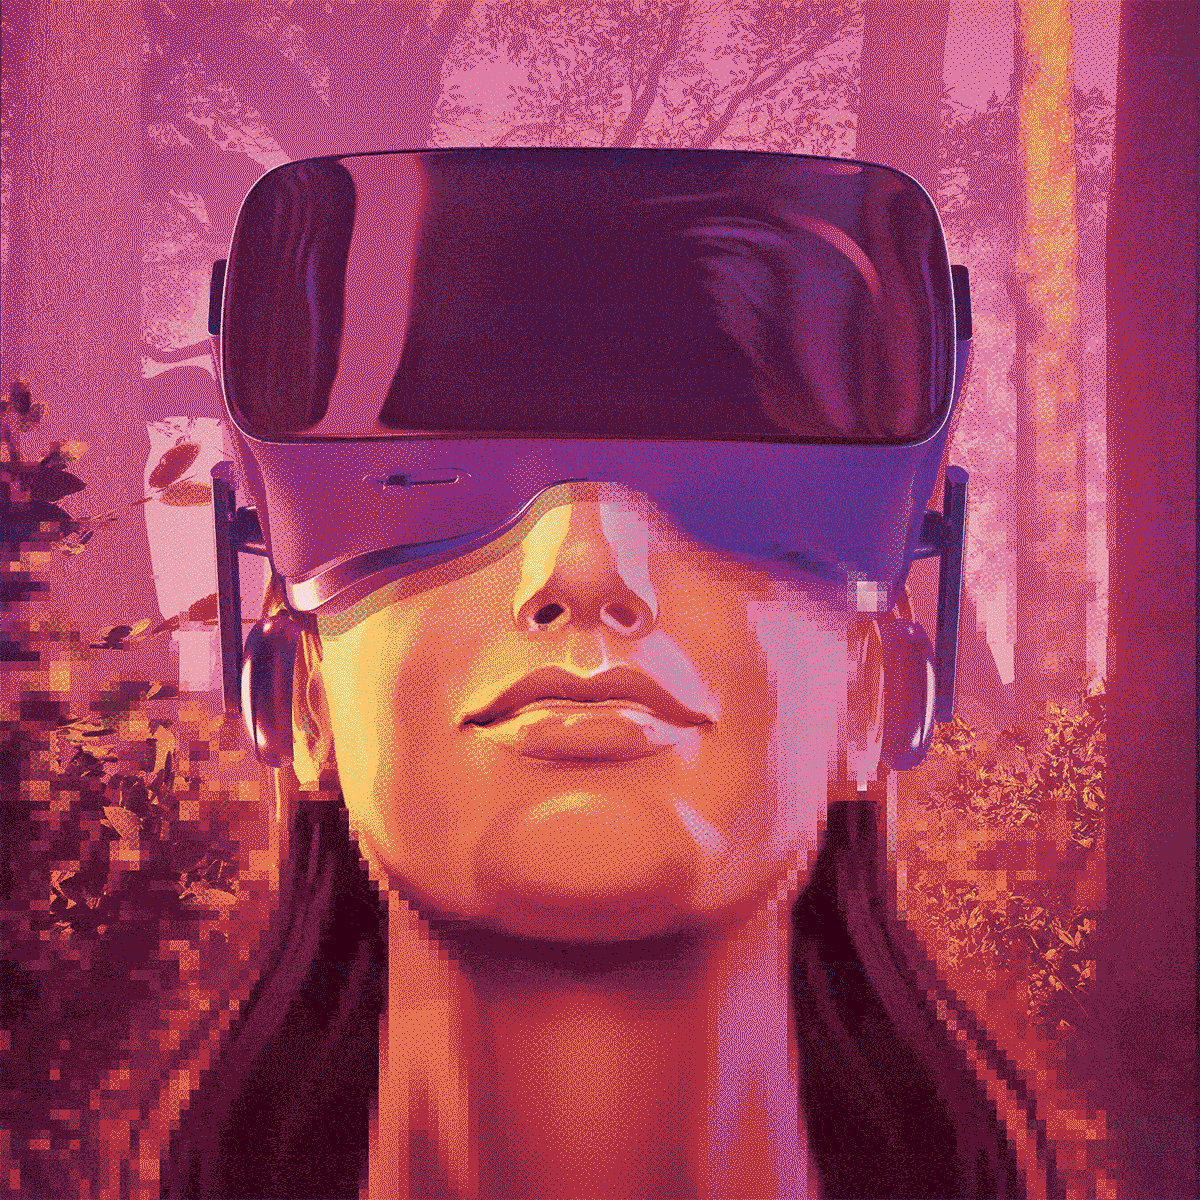 Illustrated person wearing VR headset